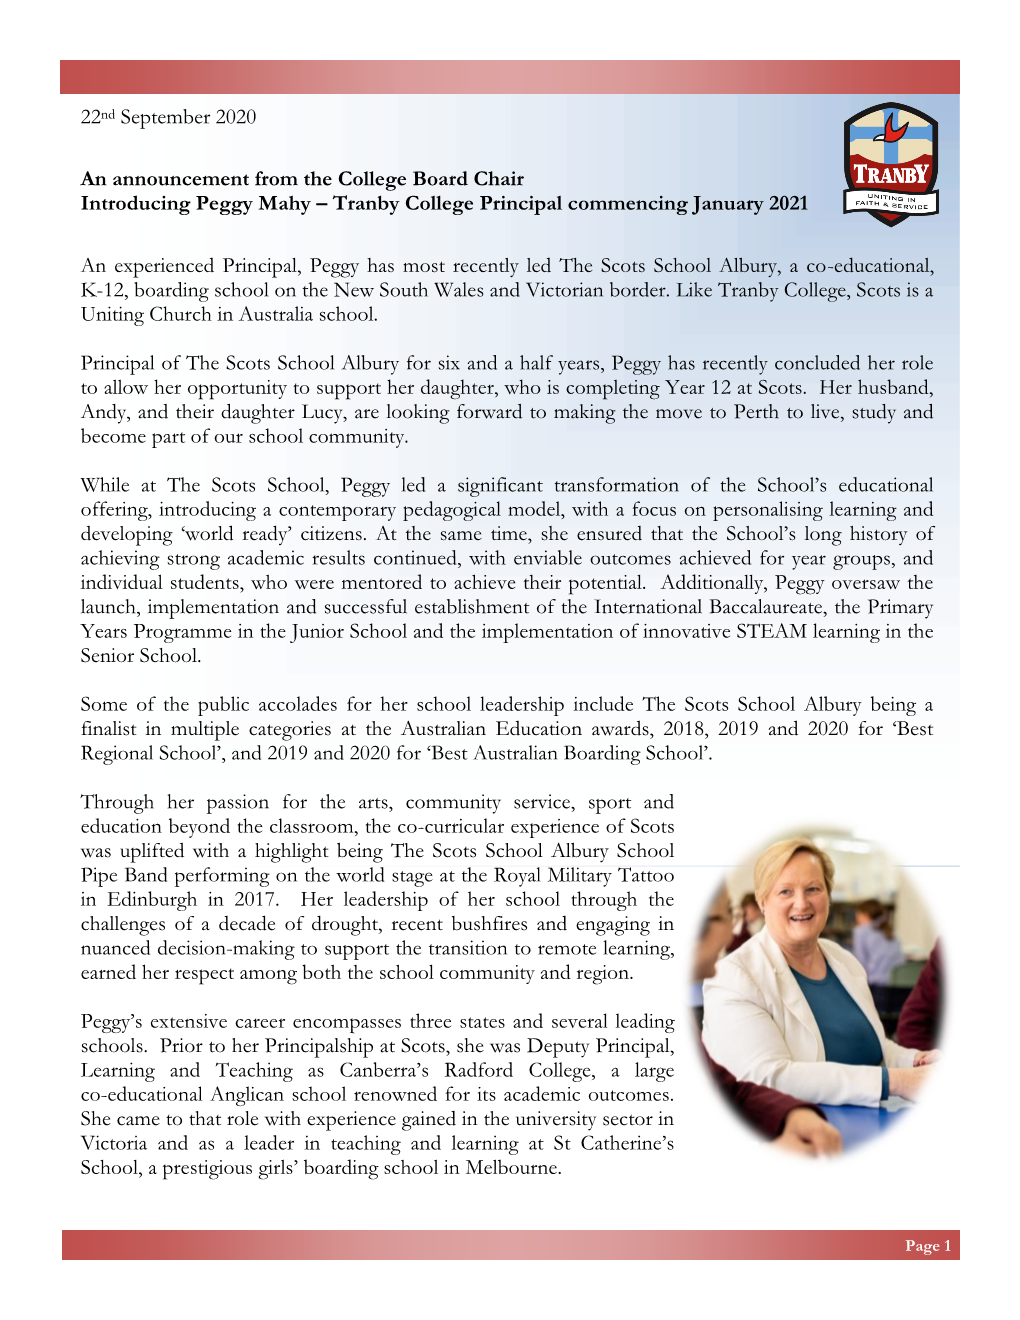 Peggy Mahy, Tranby College Principal Commencing January 2021